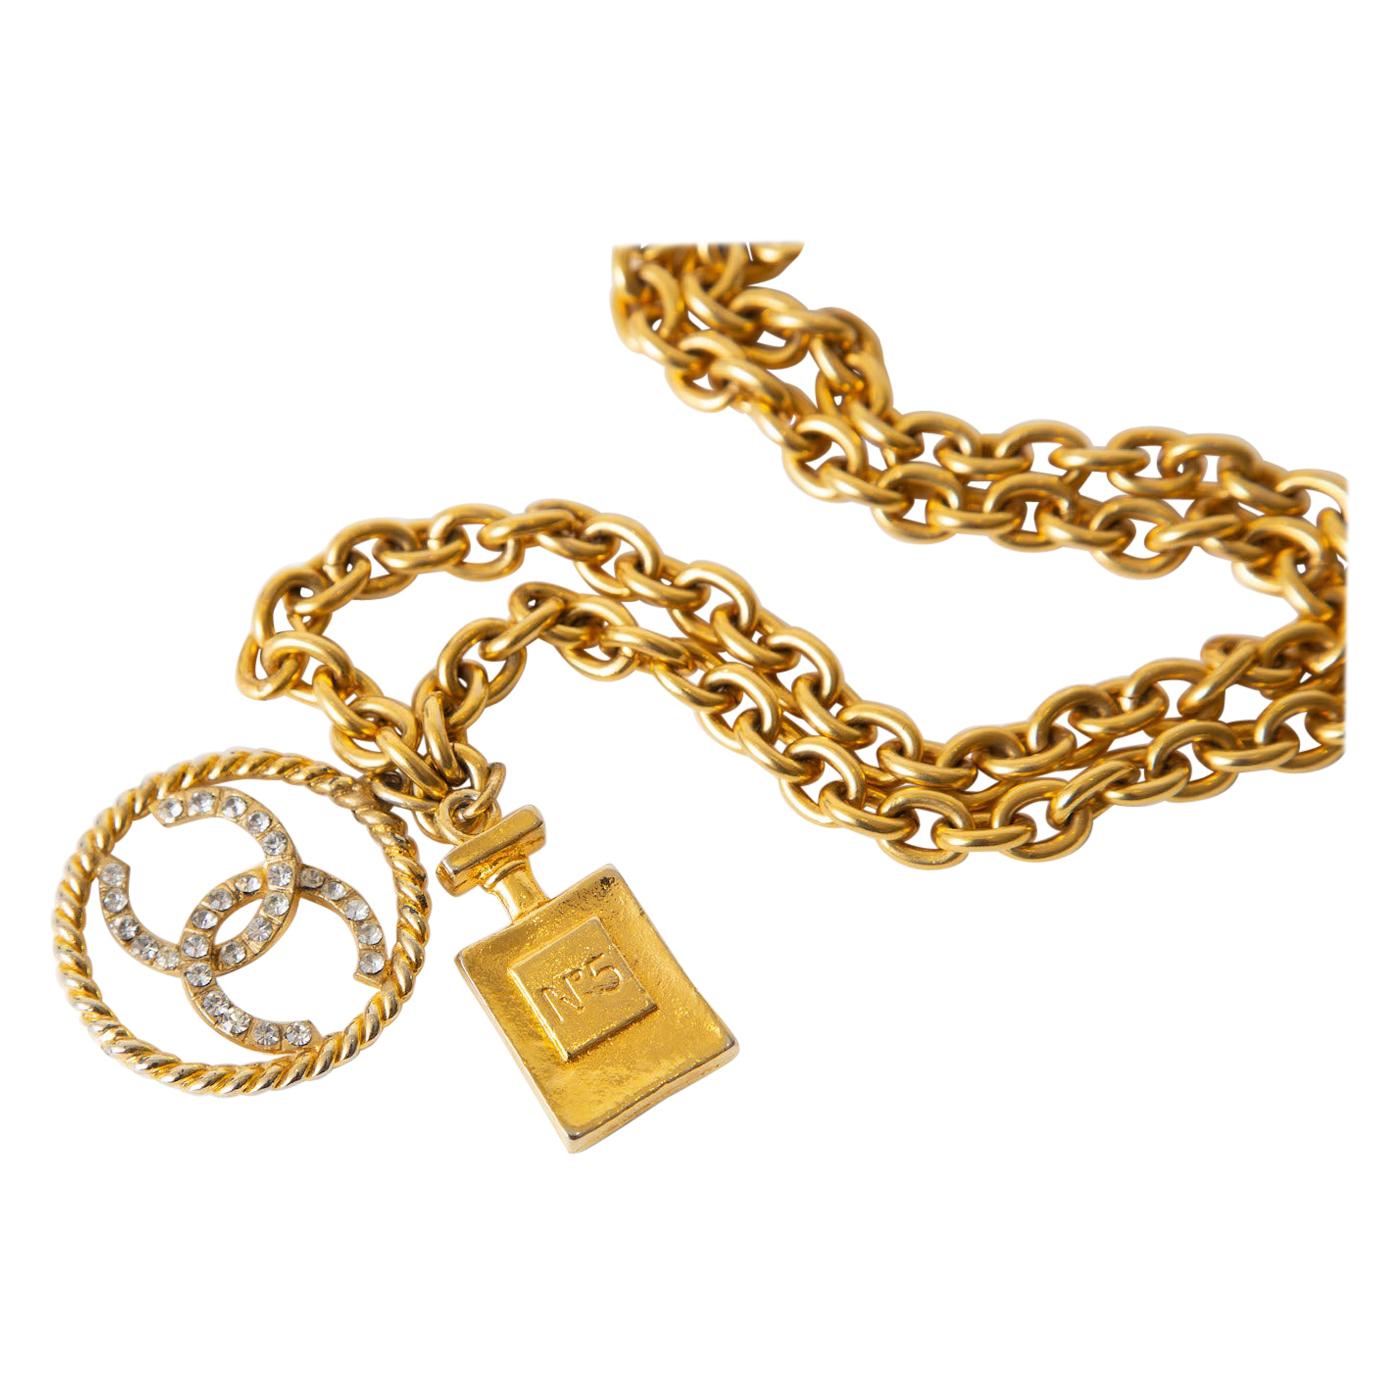 This Chanel 1980's chain link necklace is long and is pendant formed at the end with a circular CC''s of clear rhinestones and a dangled that says perfume # 5. One can go on top of another. It can be doubled on the neck to make more of a choker.